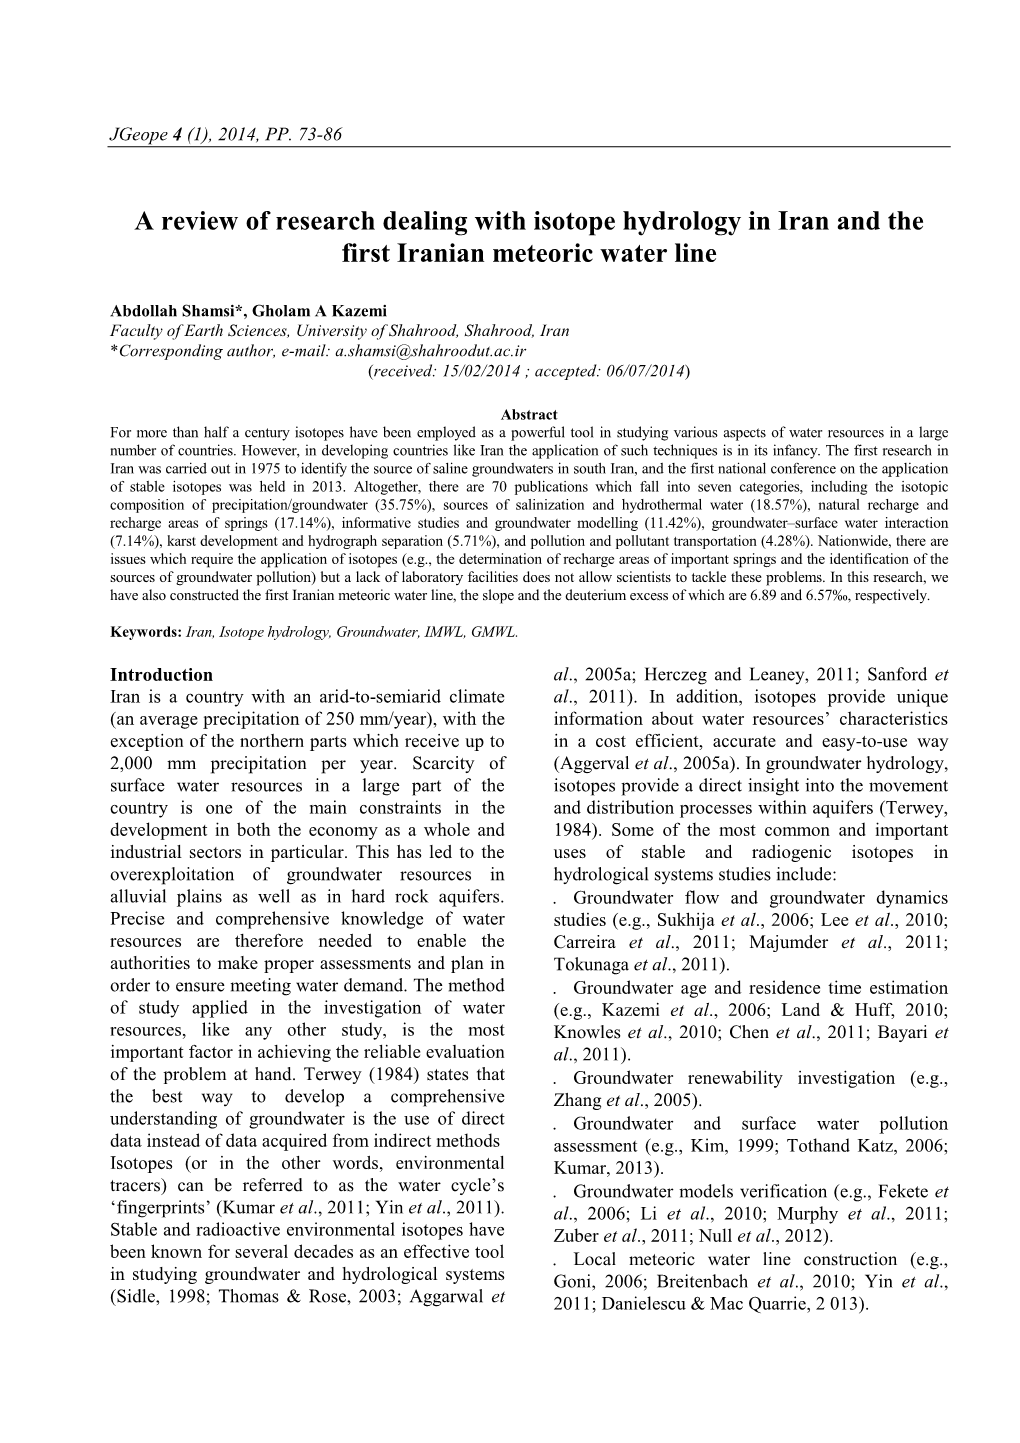 A Review of Research Dealing with Isotope Hydrology in Iran and the First Iranian Meteoric Water Line